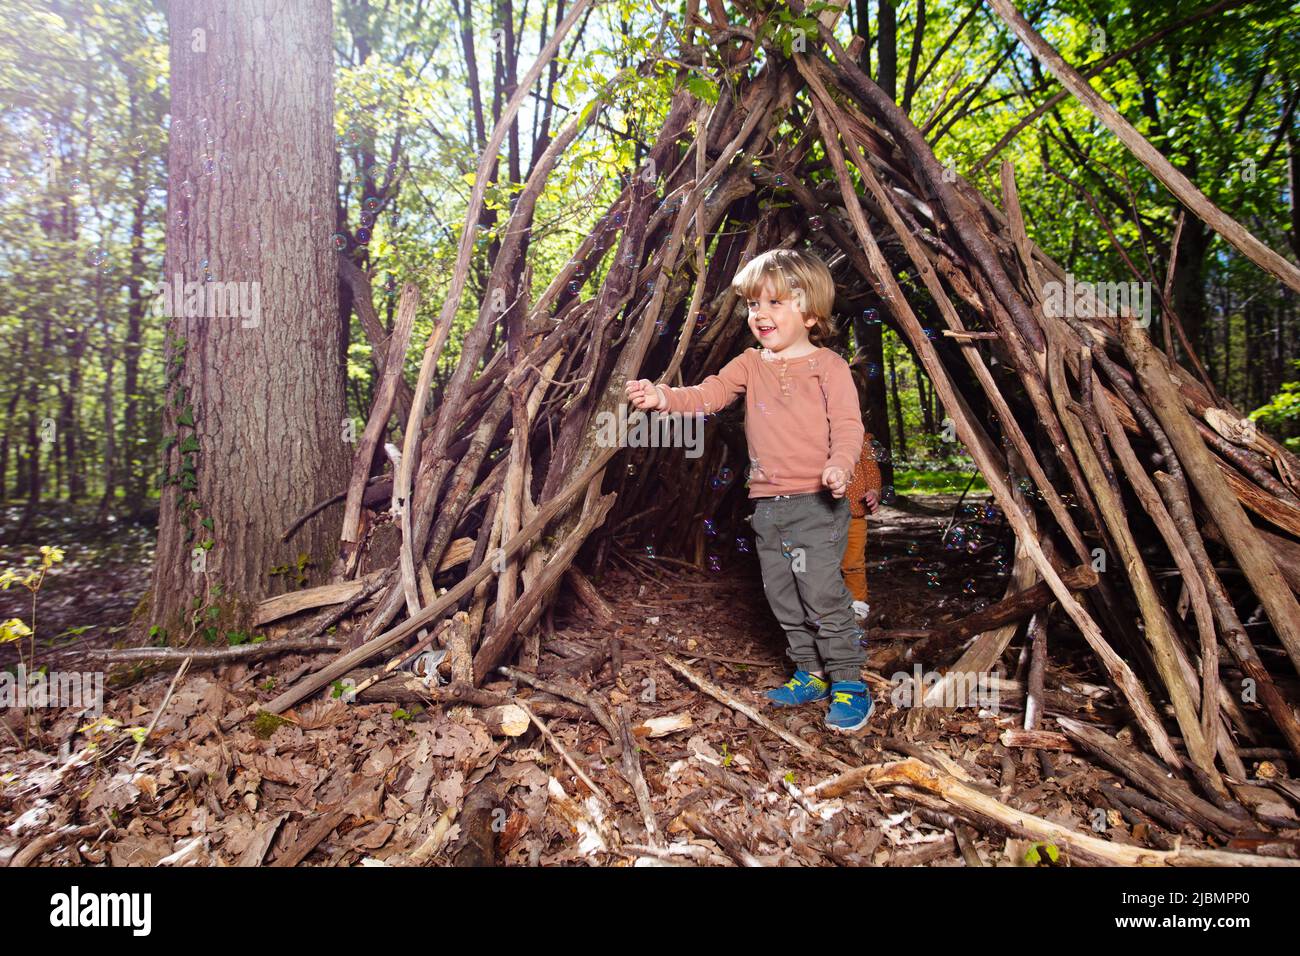 Blond boy play with soap bubbles in forest hut of branches Stock Photo